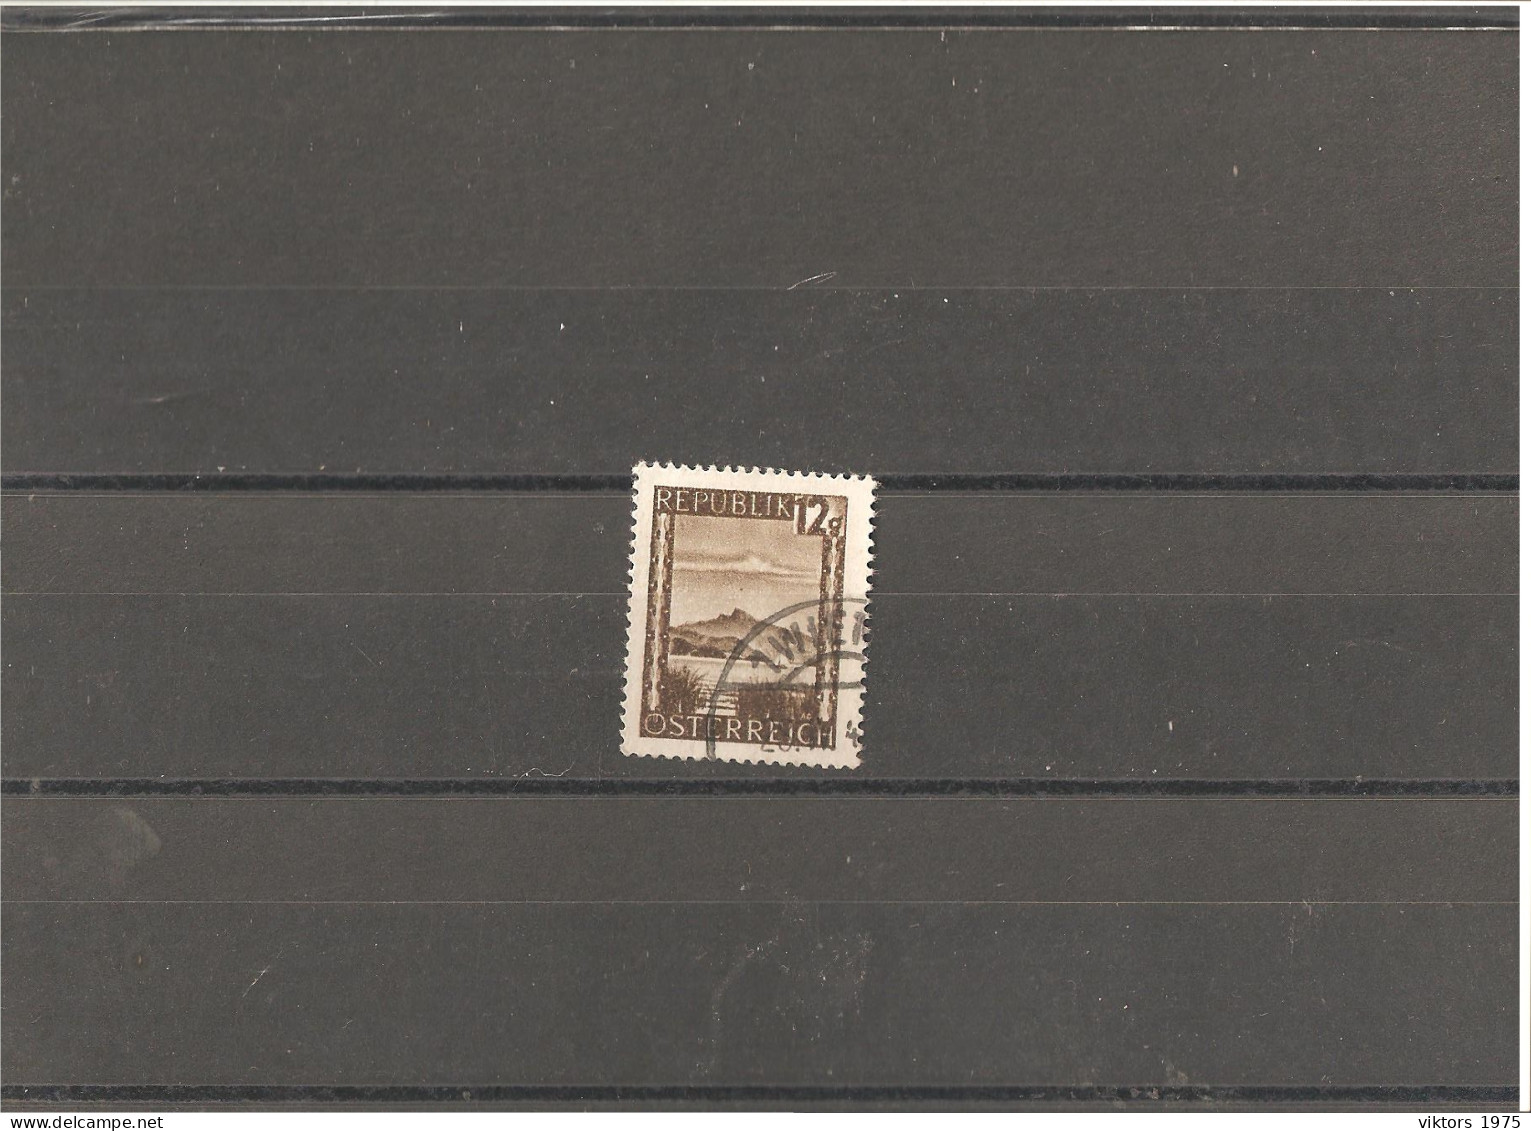 Used Stamp Nr.747 In MICHEL Catalog - Used Stamps